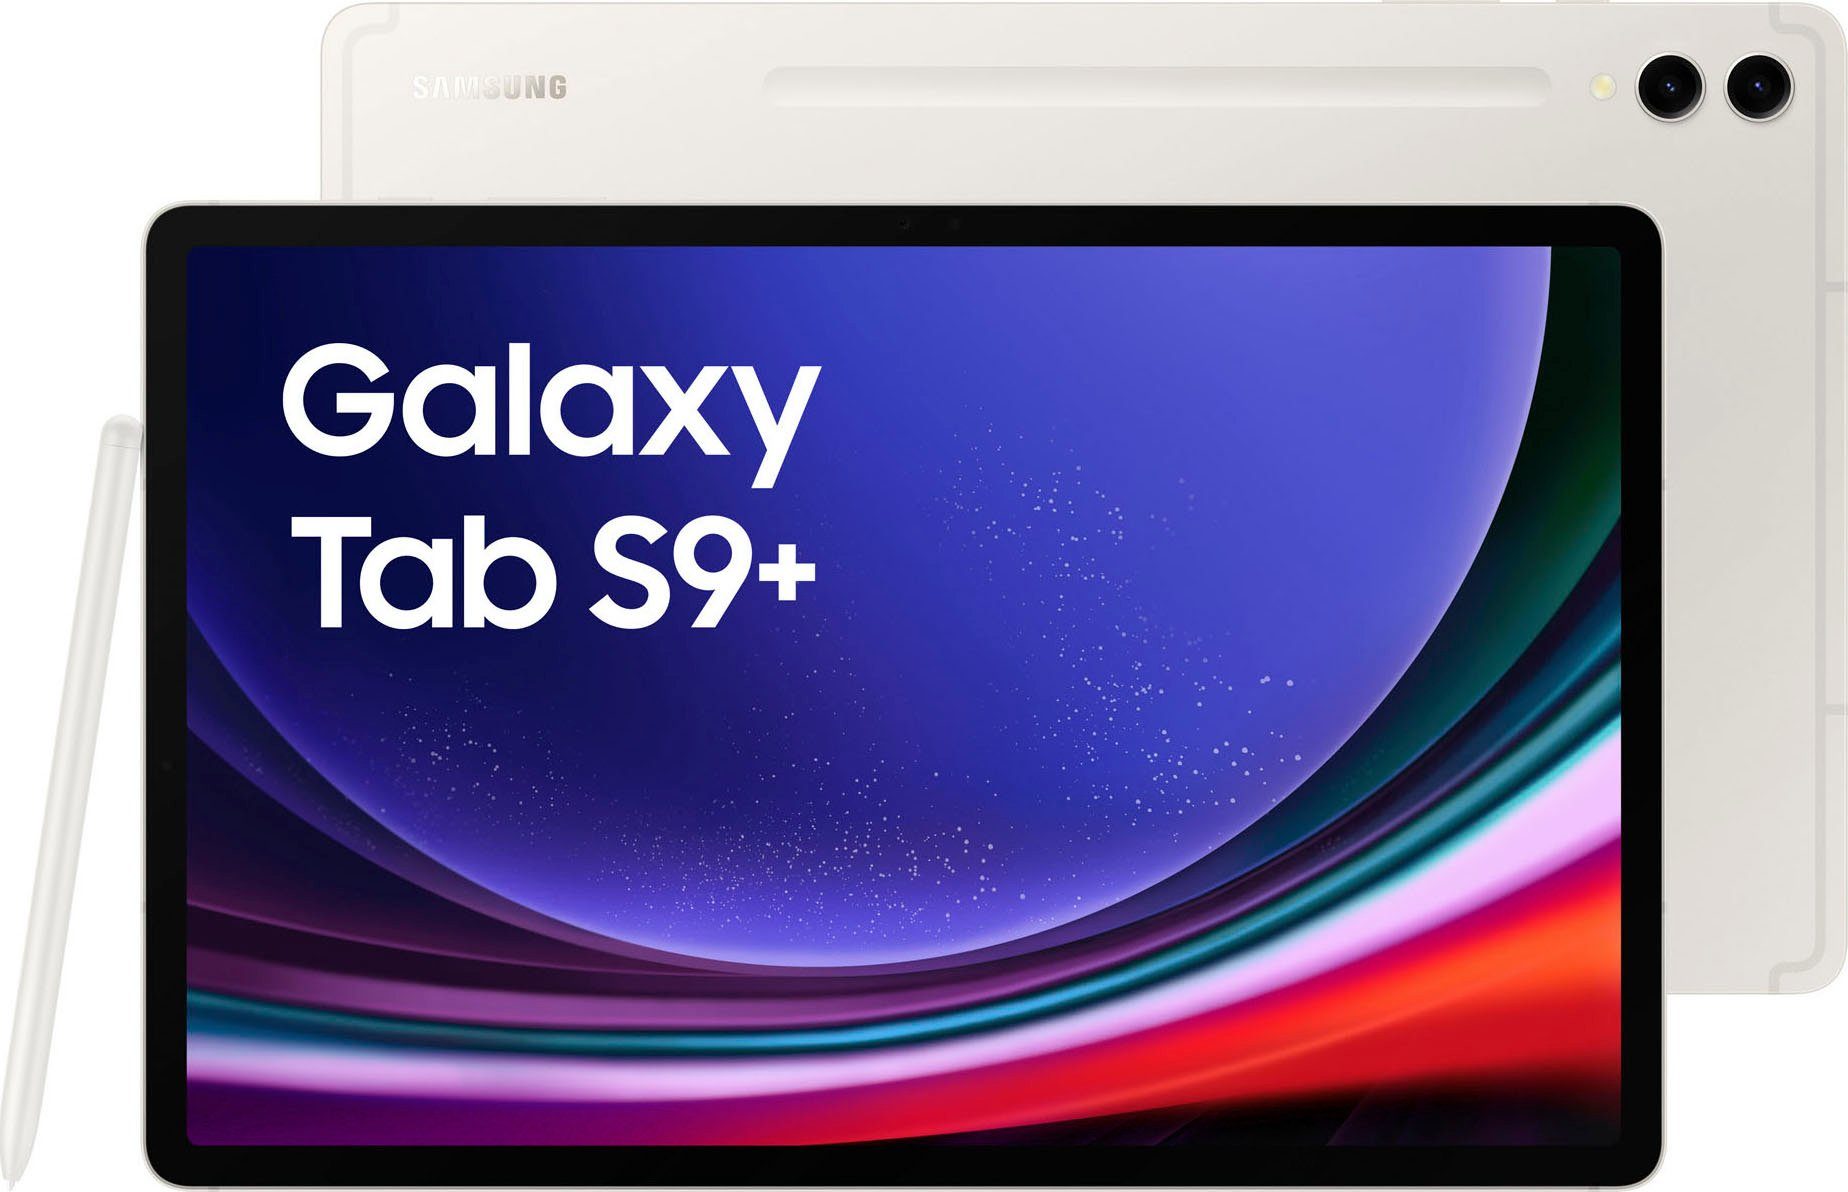 Samsung Galaxy Android, S9+ 5G Tab beige (12,4", Tablet GB, 256 5G)